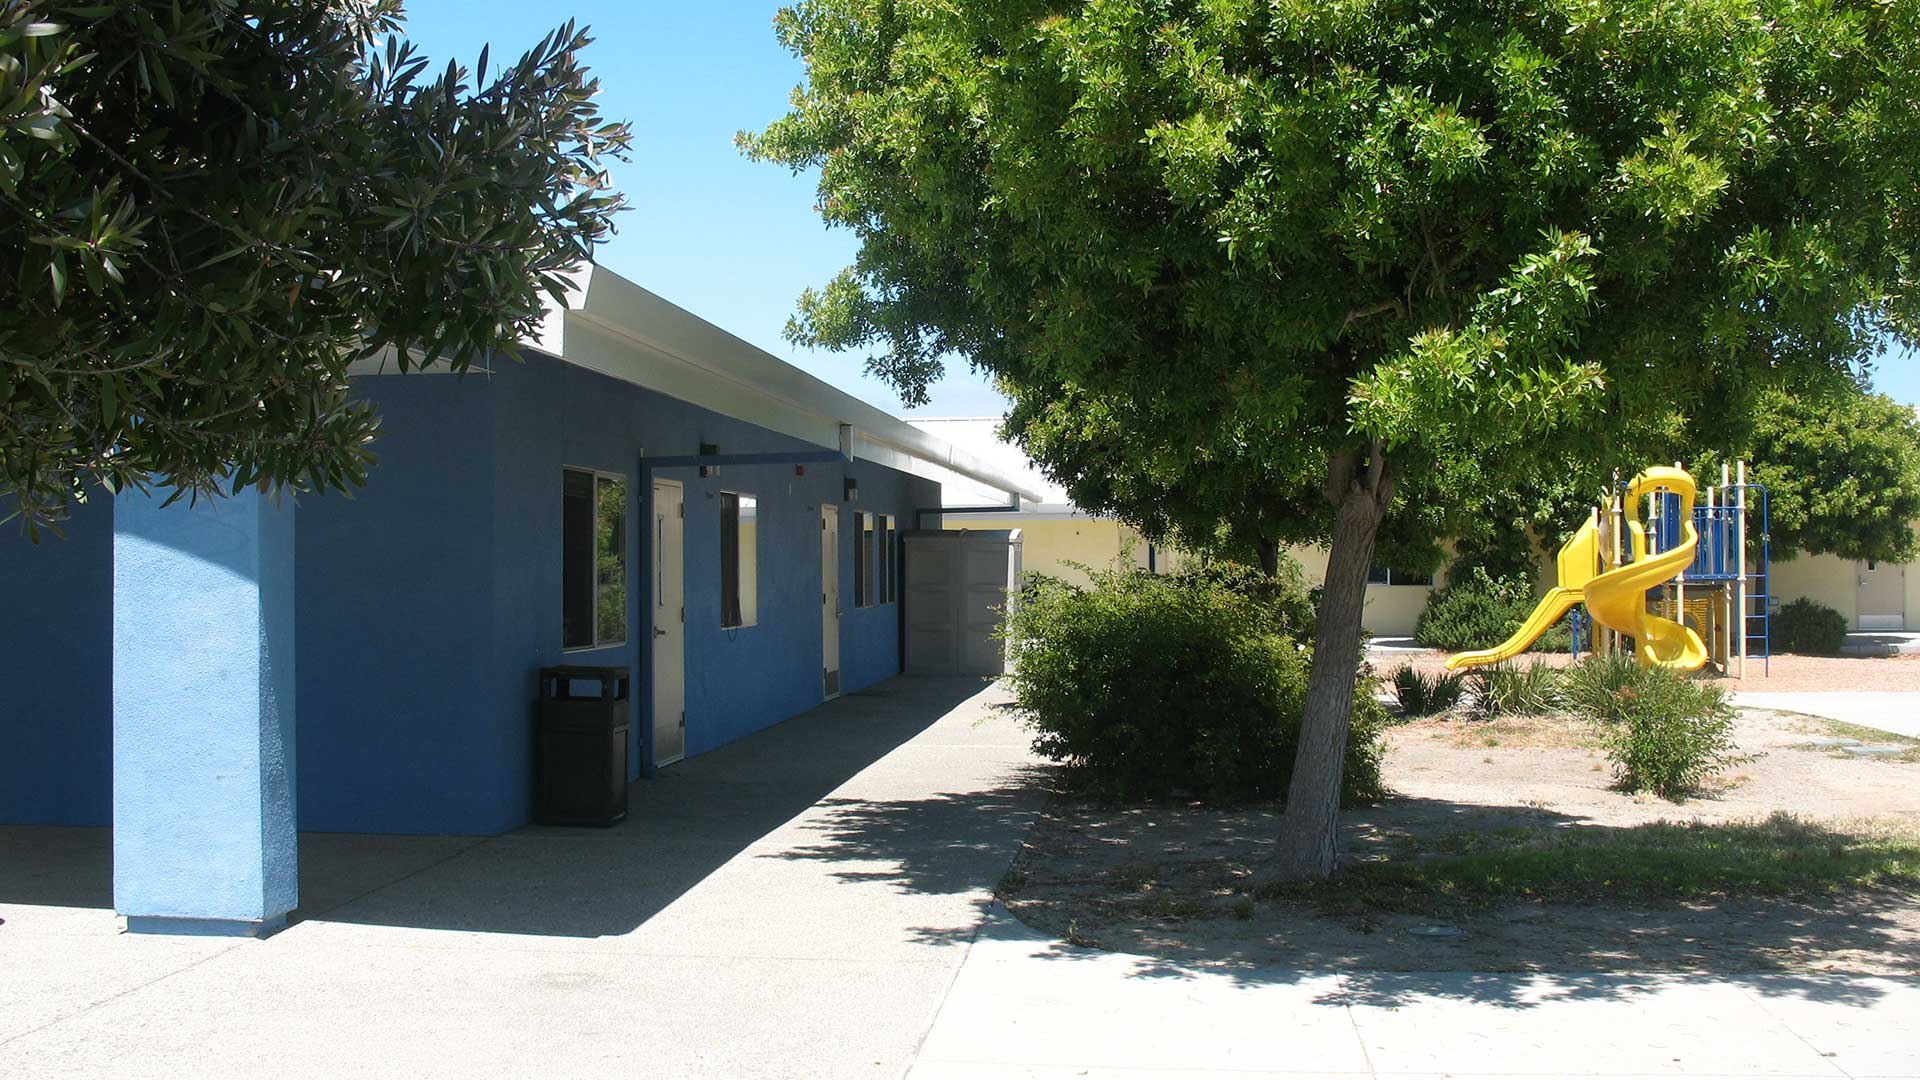 School building with blue walls and white trim.